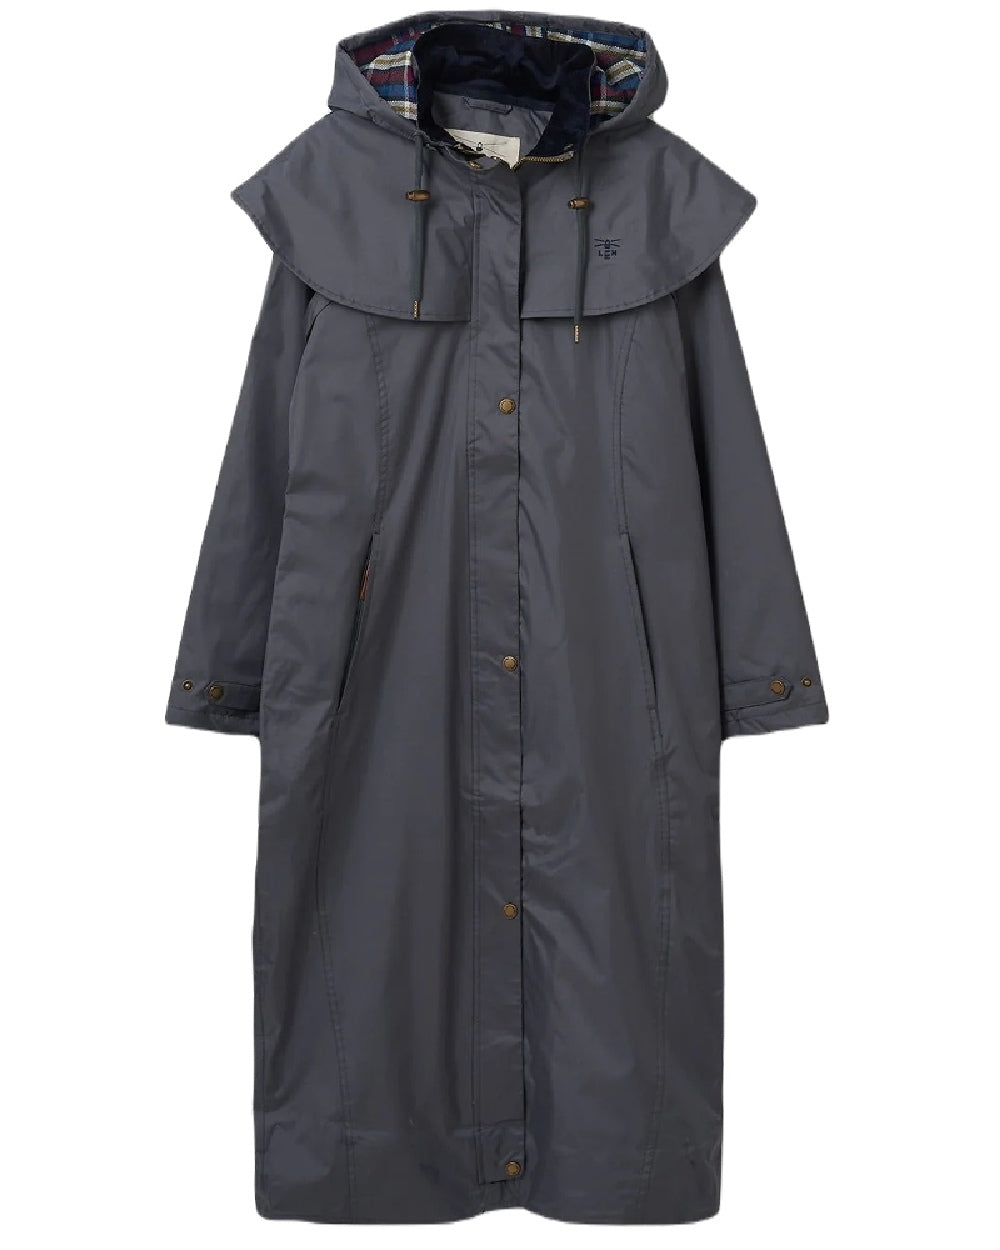 Urban Grey Lighthouse Outback Full Length Ladies Waterproof Raincoat on White background 